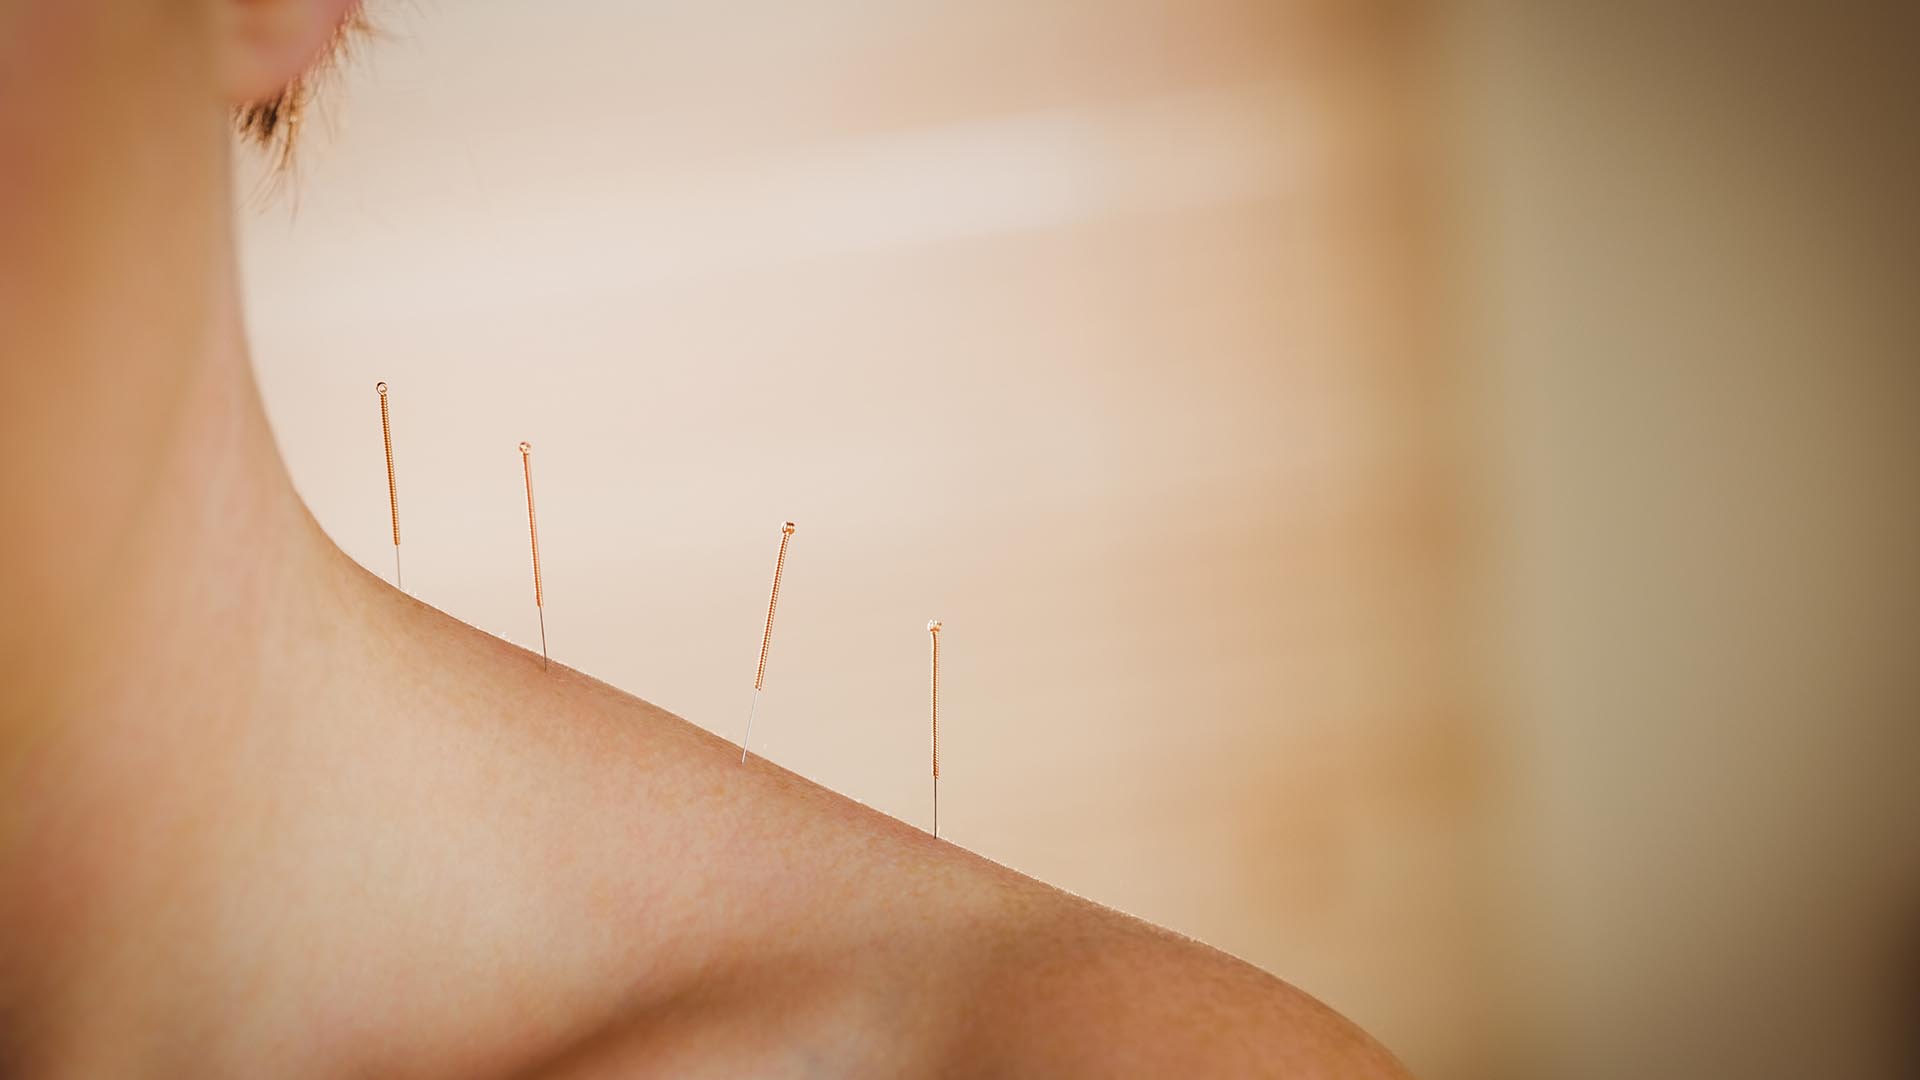 What Are The Benefits of Acupuncture